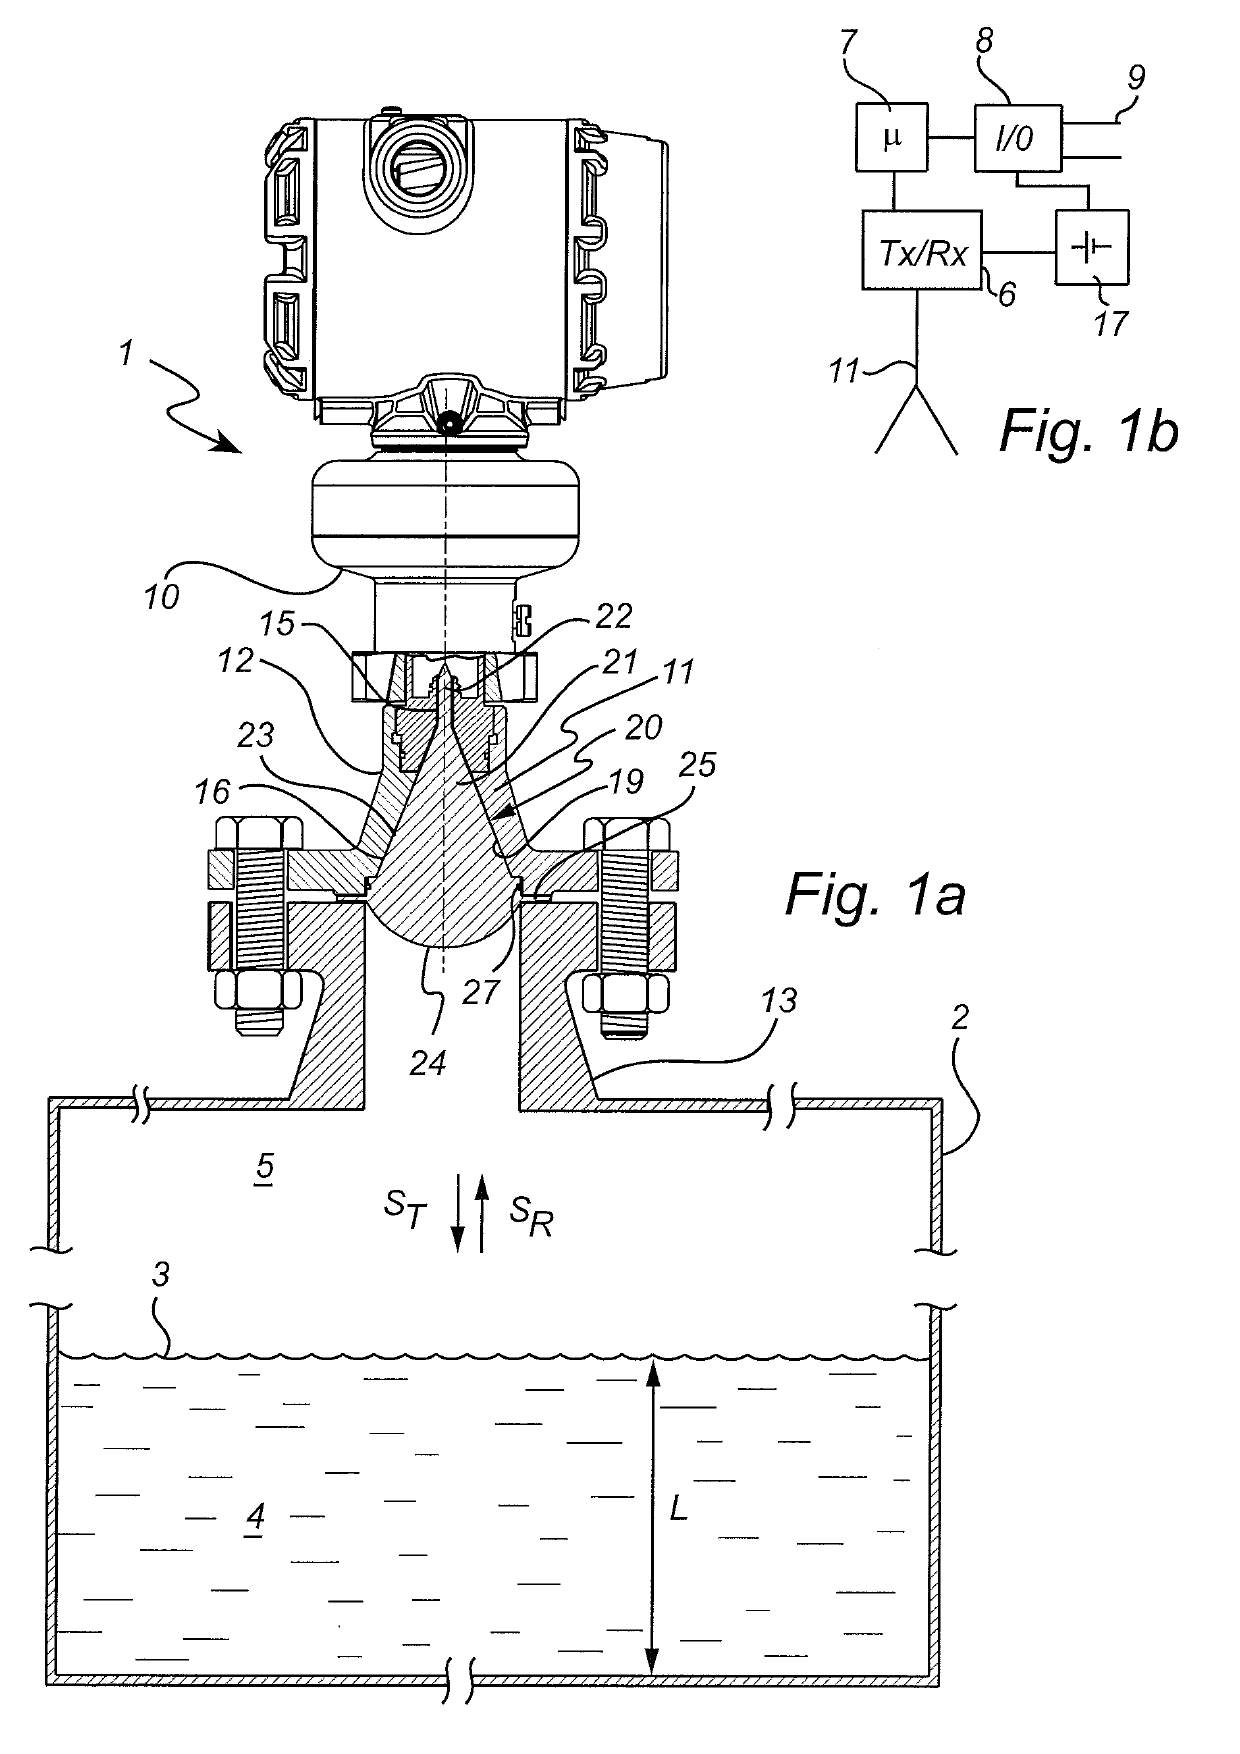 Dielectric filling member with microwave absorbing element